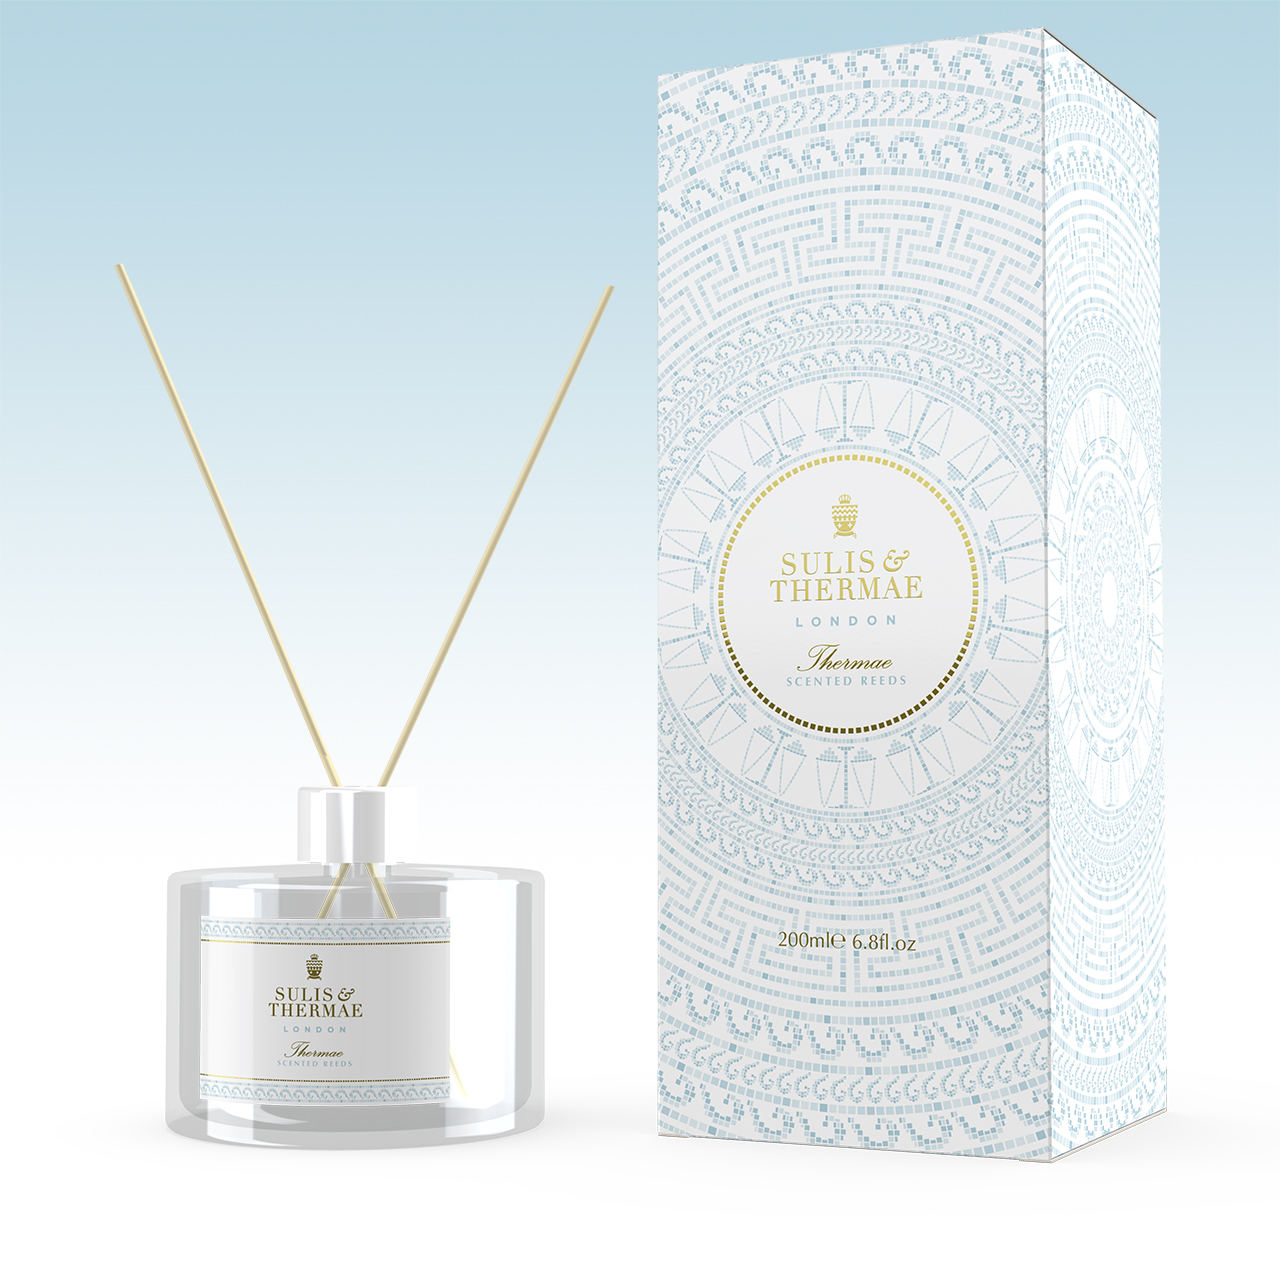 Reed diffuser labelling and product carton for Sulis and Thermae's premium lifestyle product range, designed by Paul Cartwright Branding.